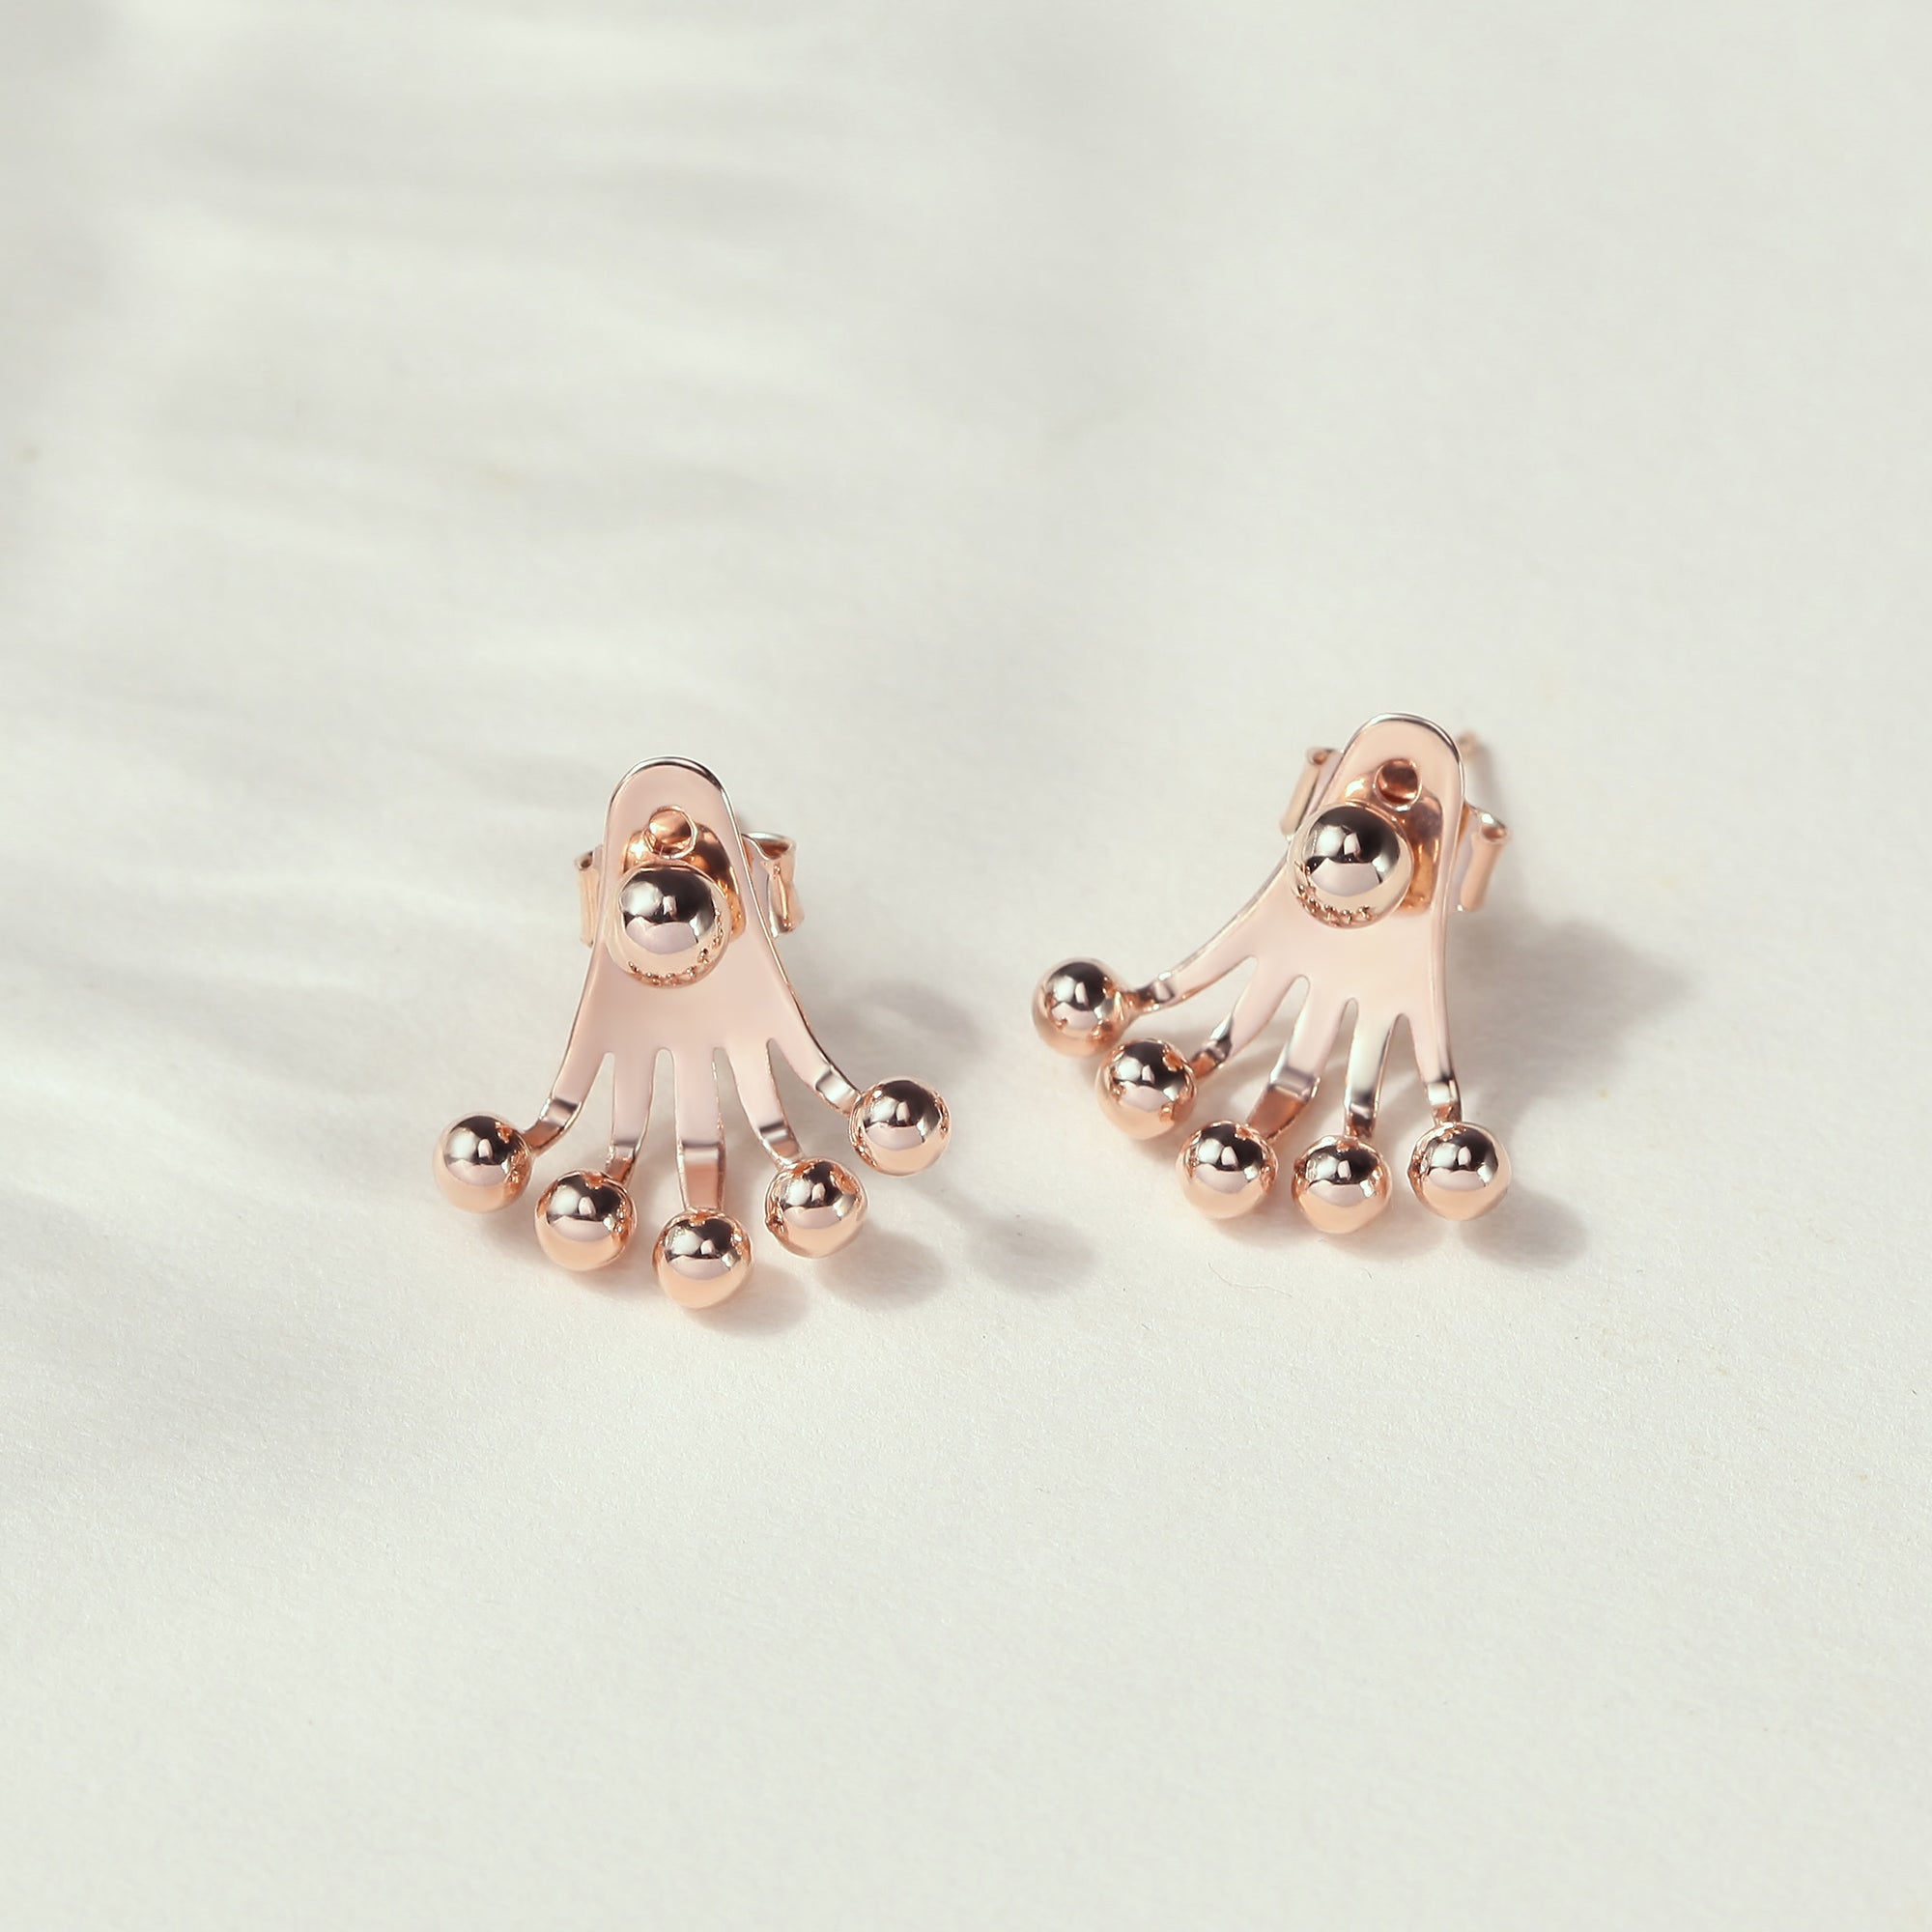 Minimal Ball-Shaped Ear Jacket Earring in Sterling Silver 
Small and dainty, perfect for everyday wear. Available in silver, gold, and rose gold. Safe for sensitive skin. - Earrings - Bijou Her -  -  - 